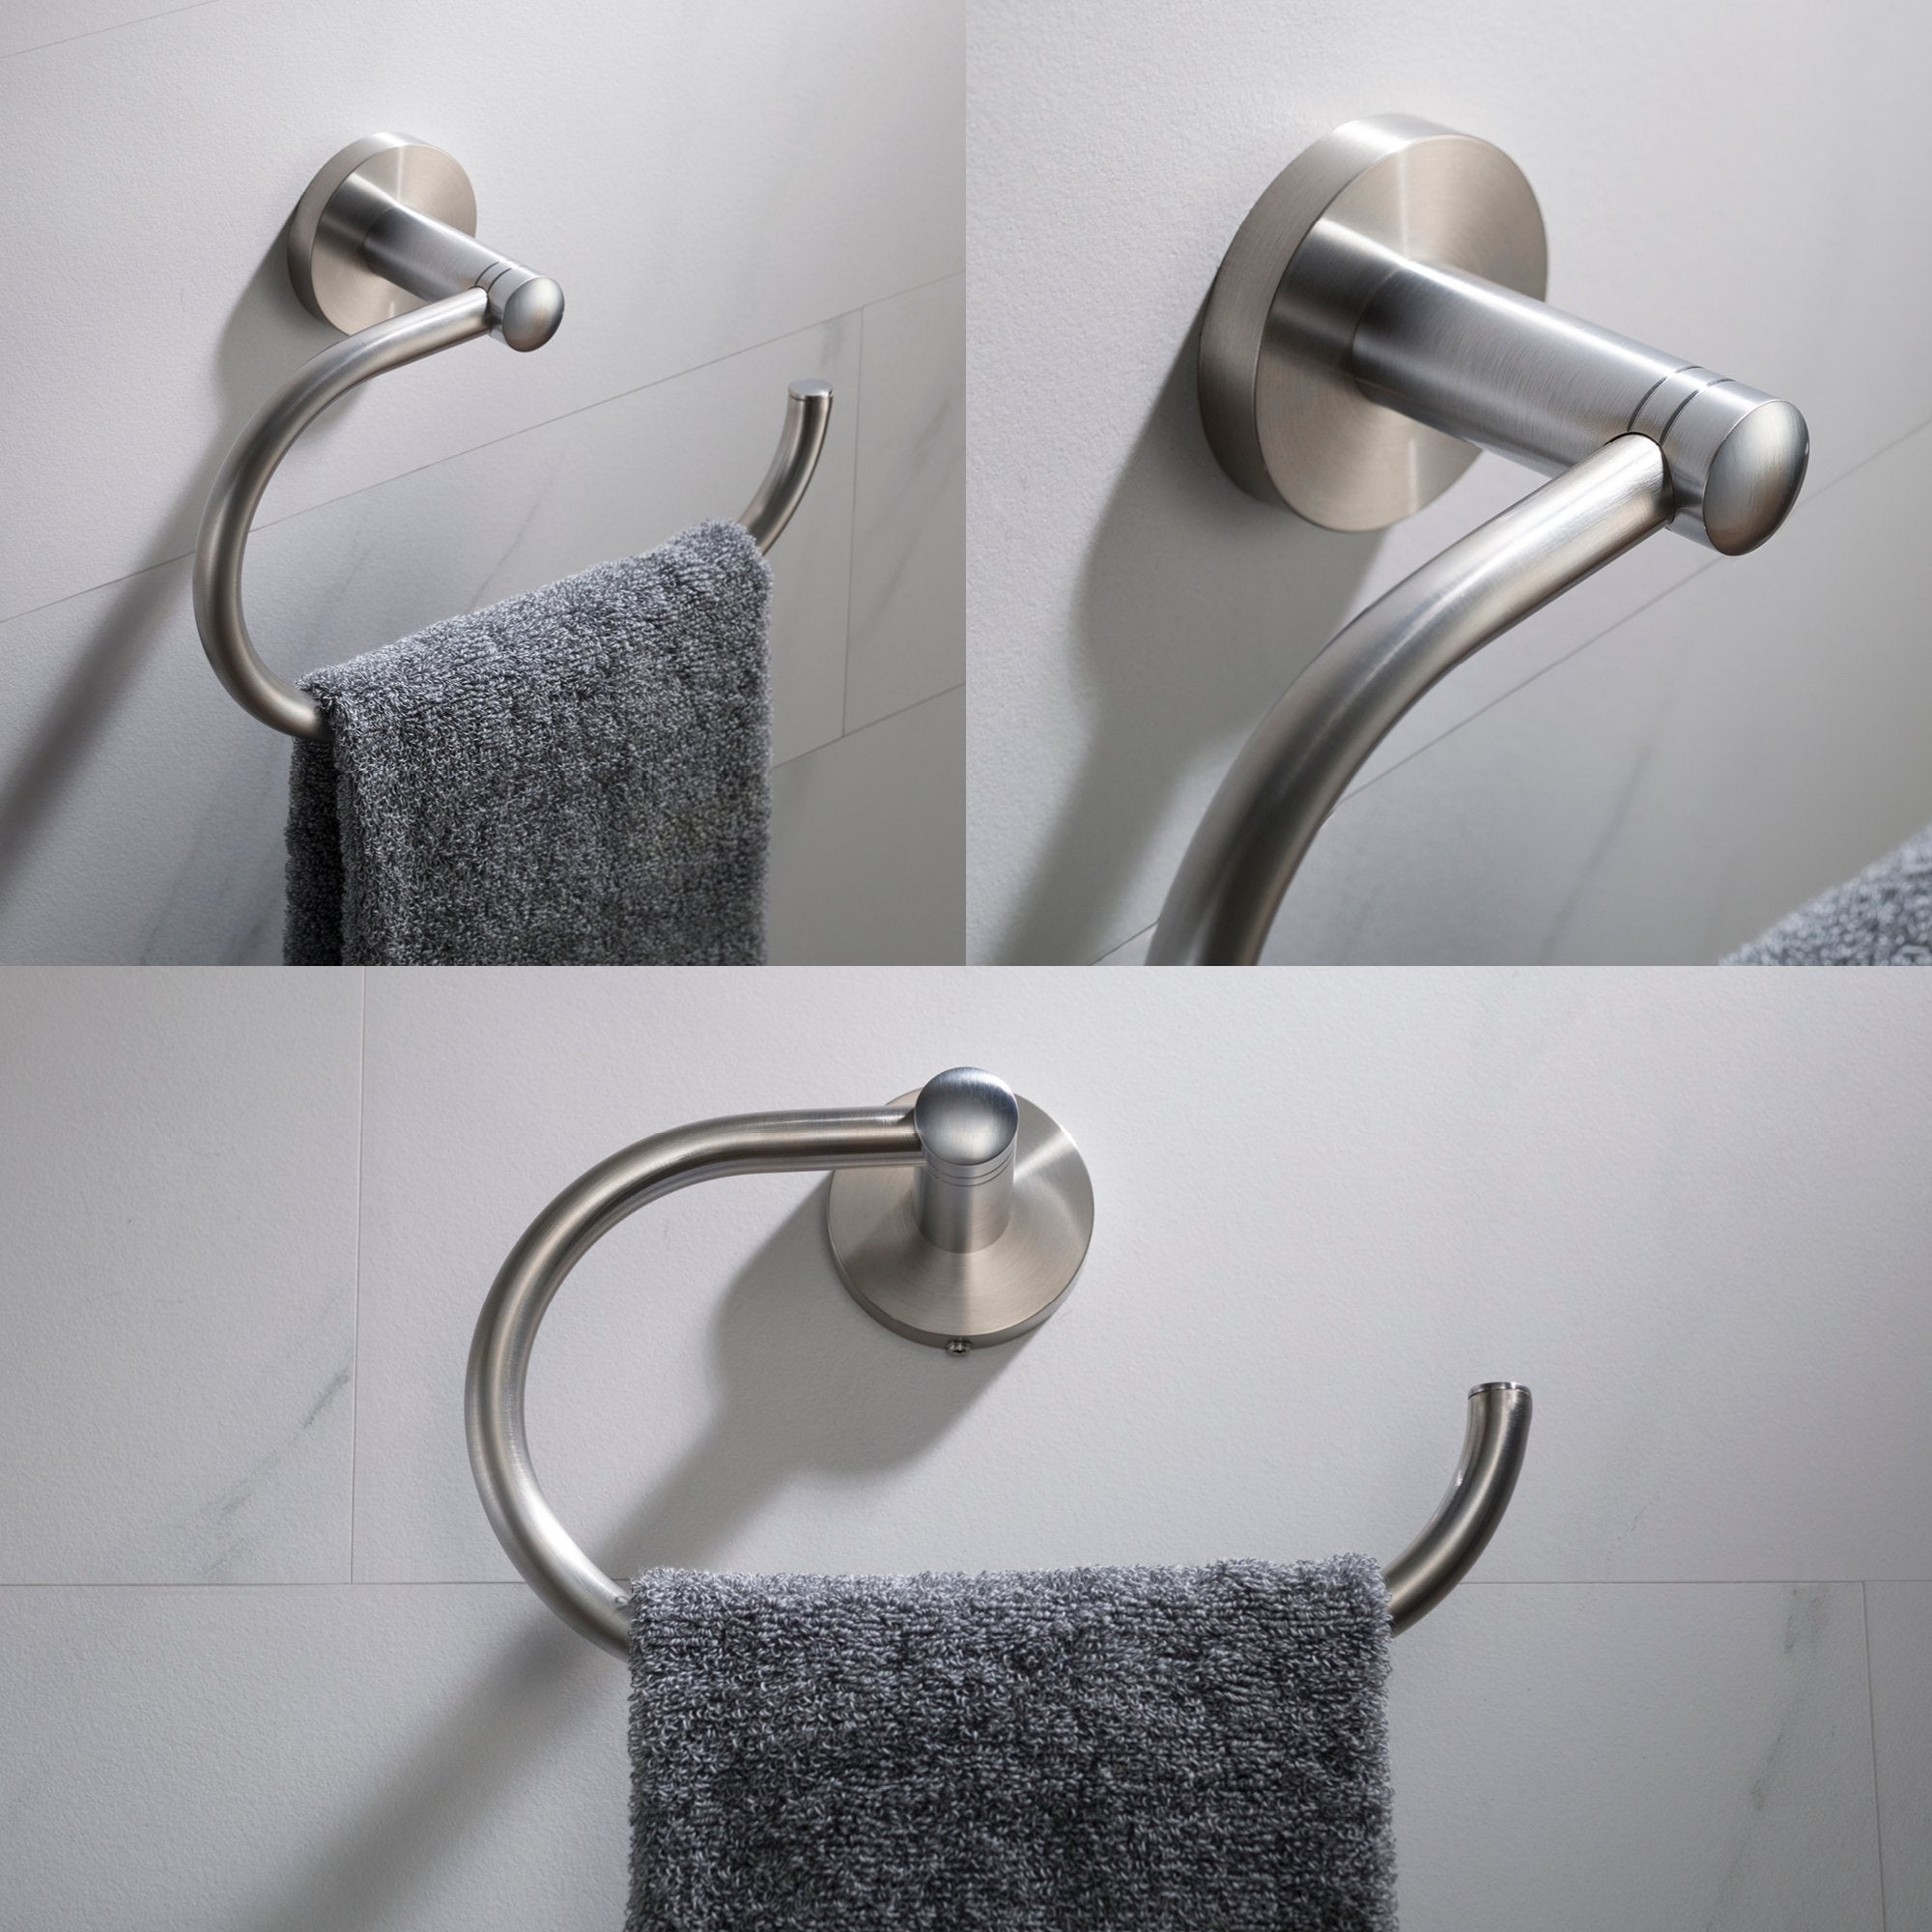 KRAUS Indy Single Handle Vessel Bathroom Faucet with 24" Towel Bar, Paper Holder, Towel Ring and Robe Hook in Spot-Free Stainless Steel C-KVF-1400-KEA-188SFS | DirectSinks